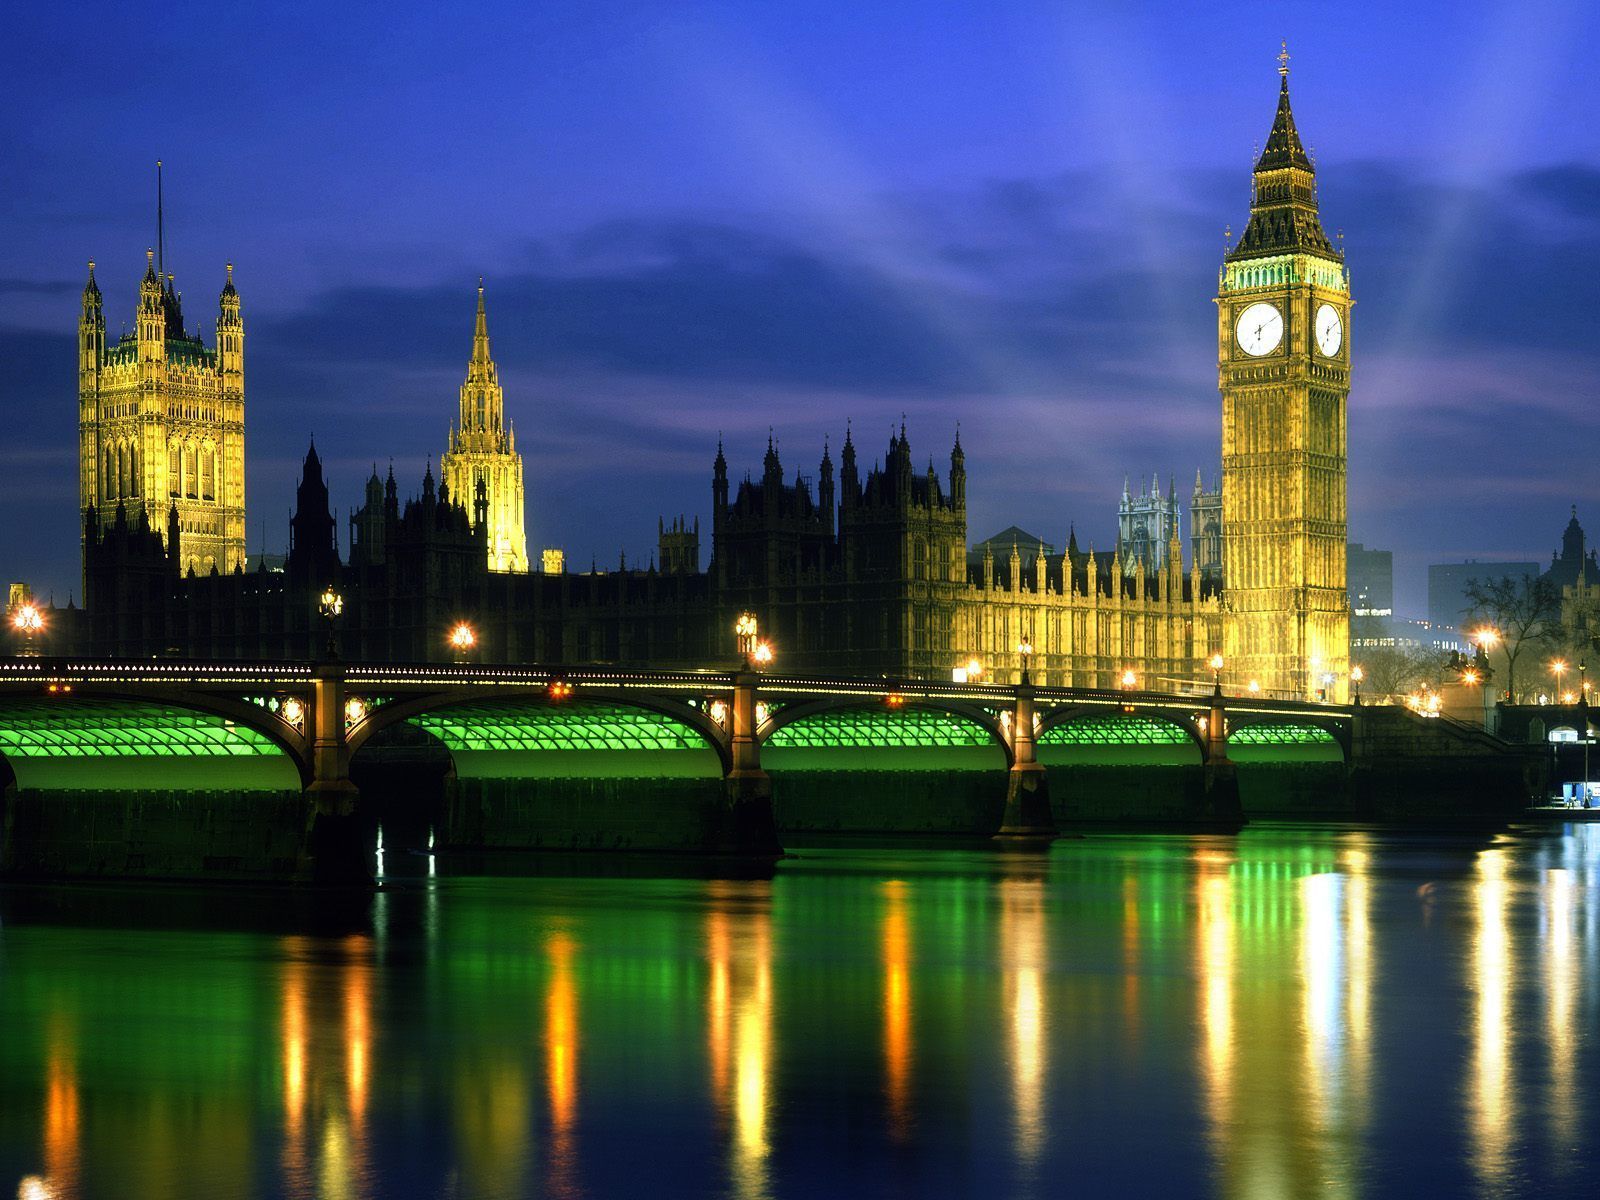 The lights of London History comes alive at night thetravelcrew